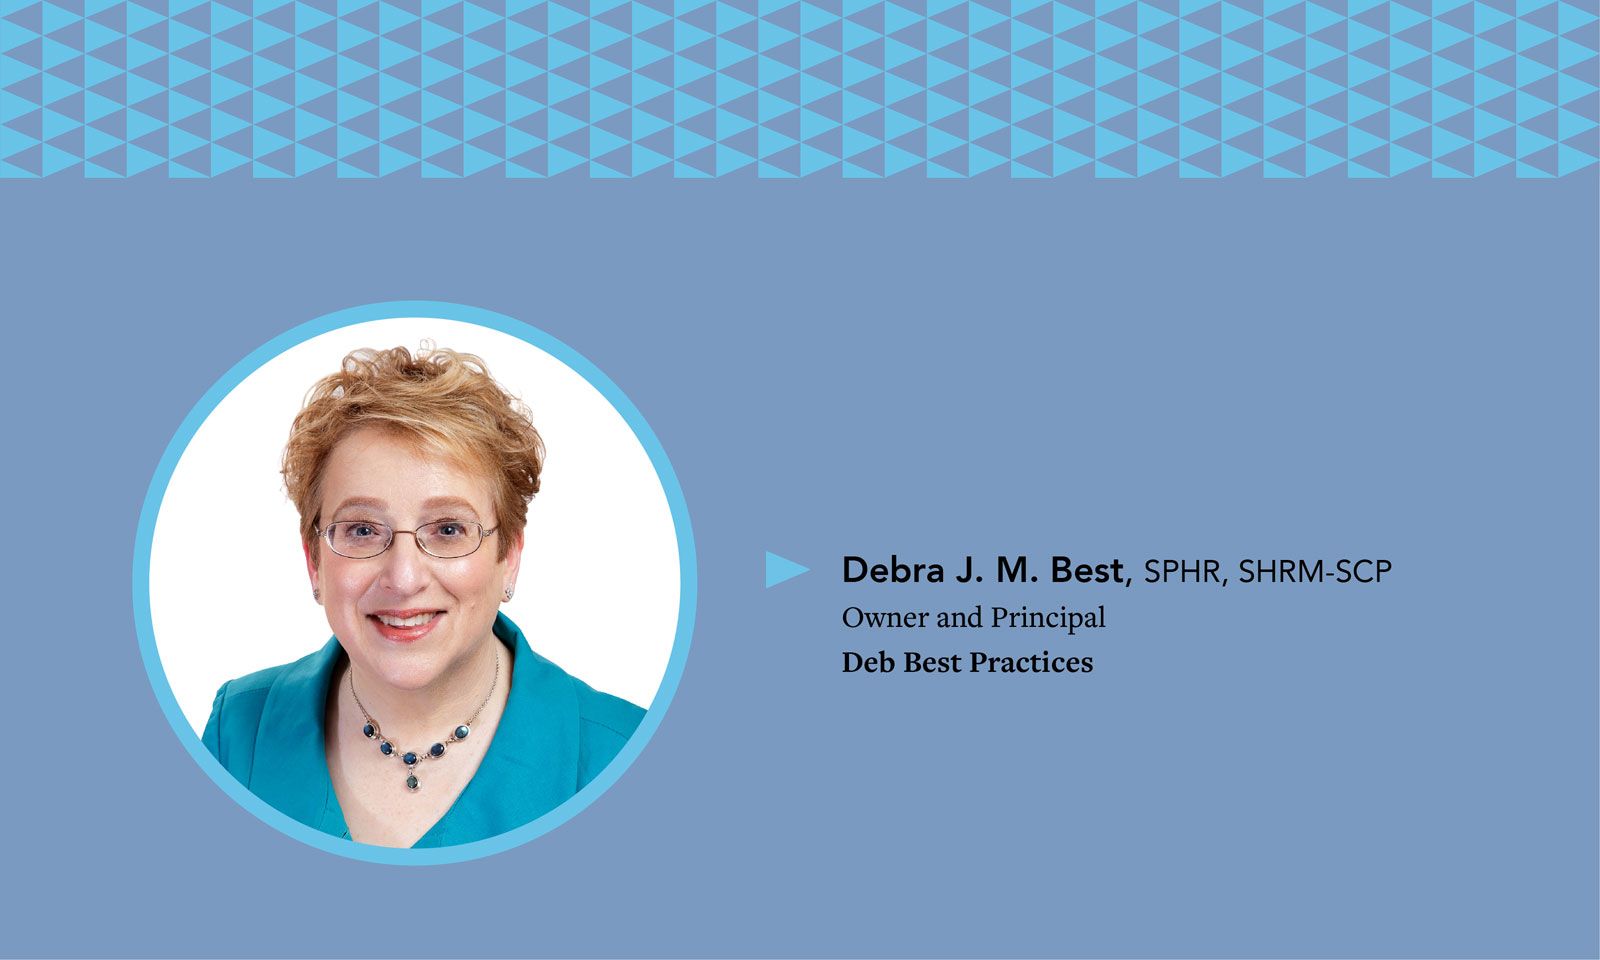 Deb Best, SPHR, SHRM-SCP owner and principal of Deb Best Practices 